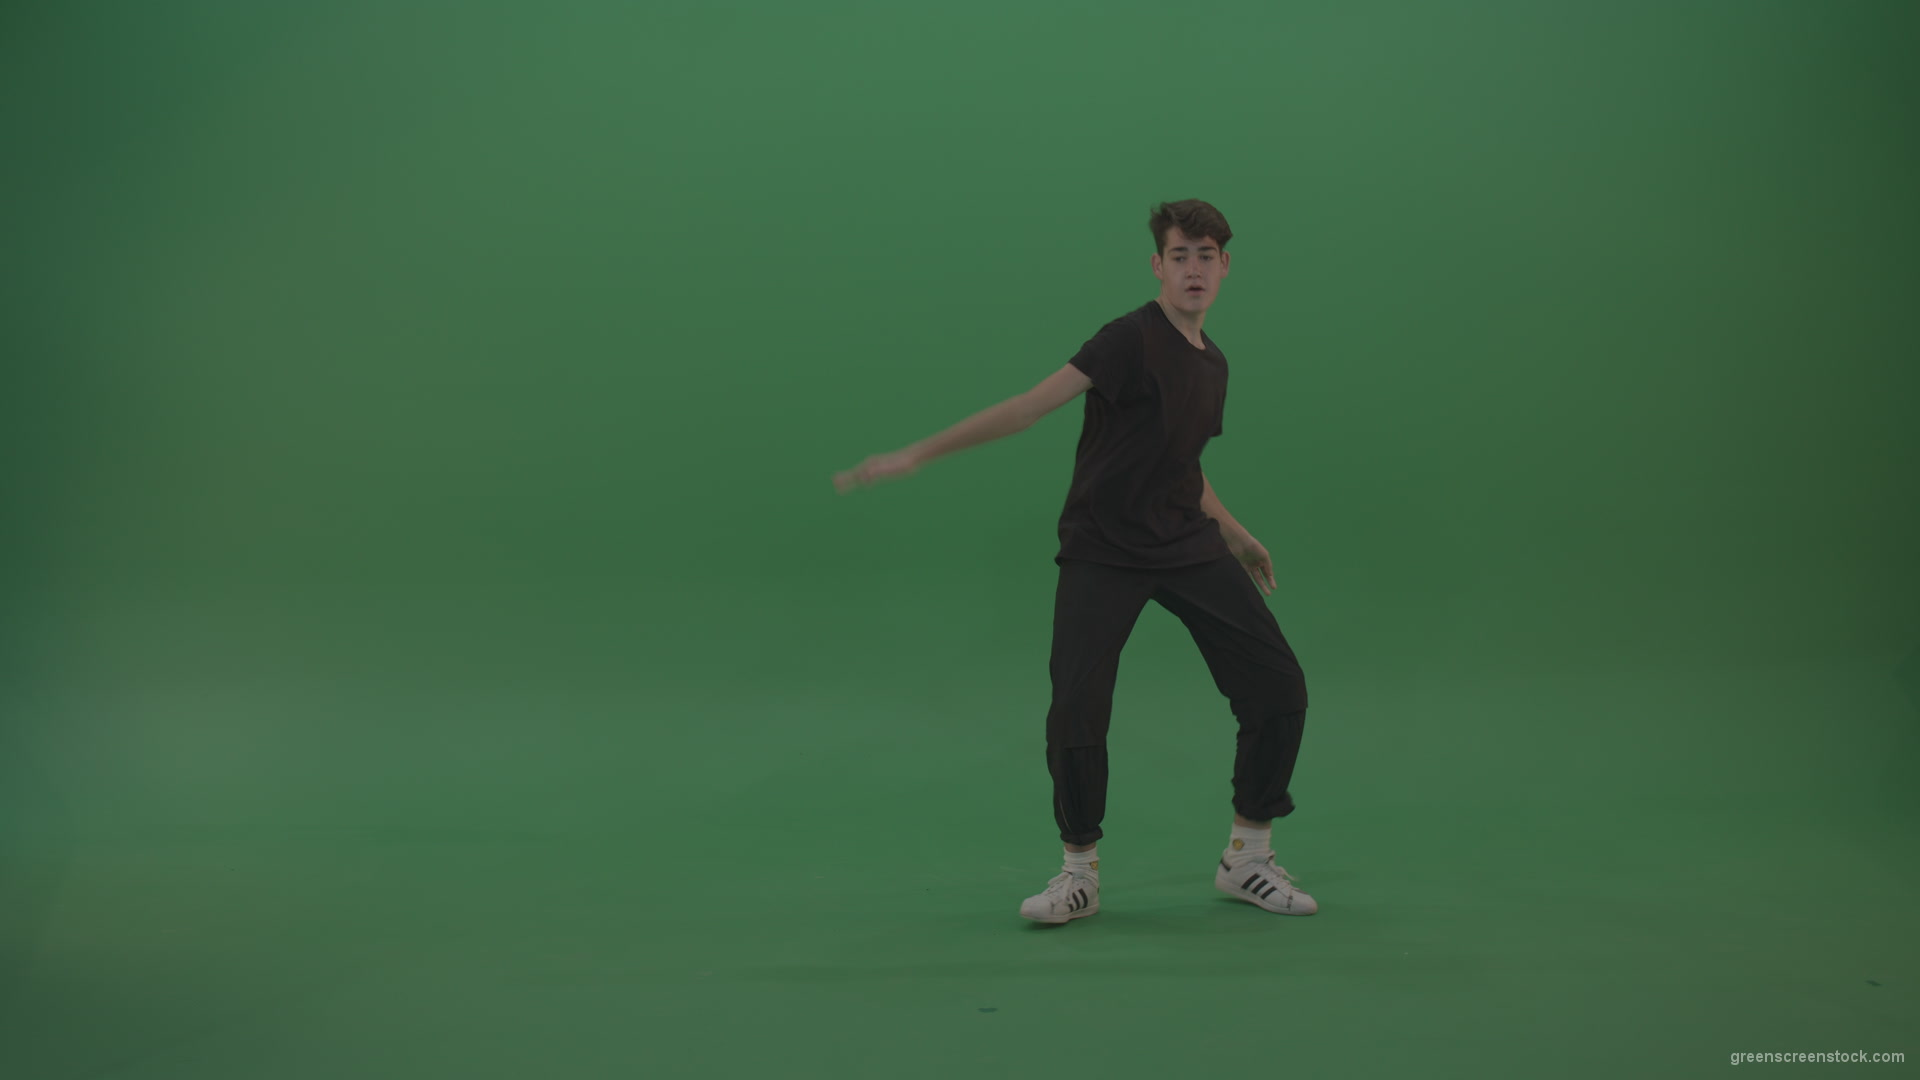 Young_Brunette_Boy_Showing_Awesome_Hip_Hop_Dance_Technical_Skills_With_Robot_Tought_Moves_On_Green_Screen_Chroma_Key_Background_006 Green Screen Stock